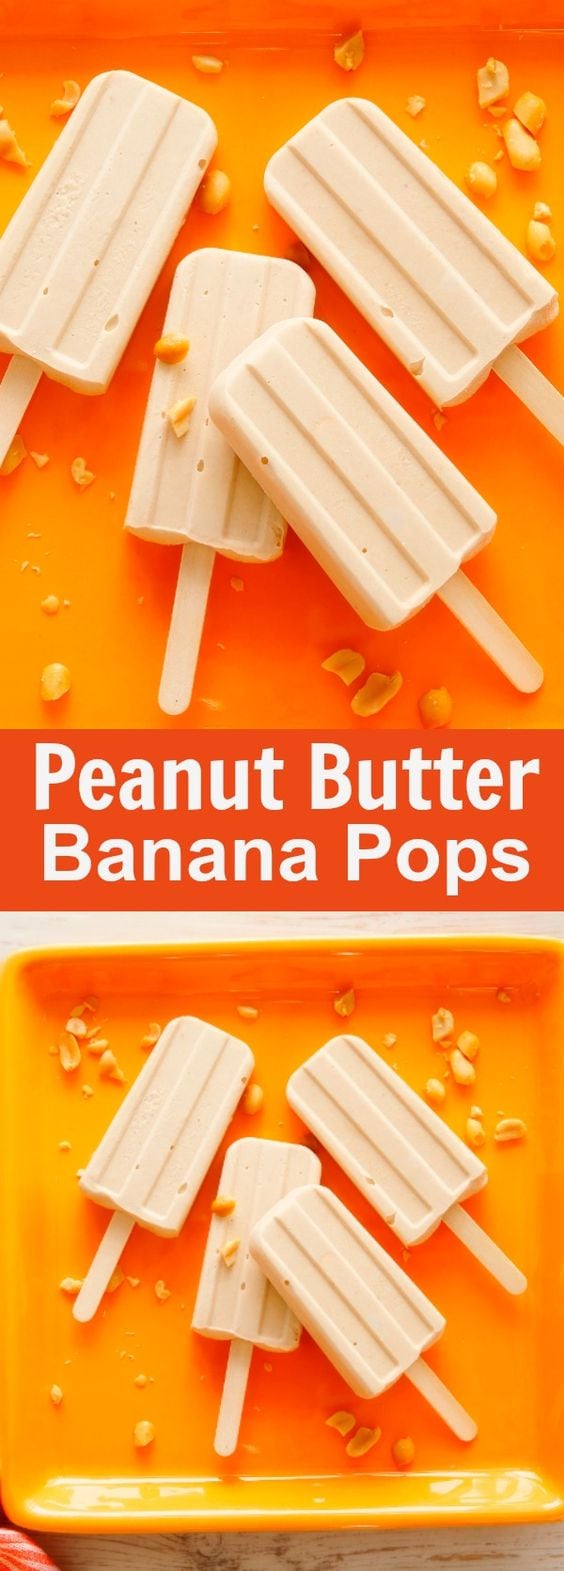 Peanut Butter Banana Pops - the creamiest homemade popsciles ever. Loaded with peanut butter and banana, they're perfect for summer | rasamalaysia.com